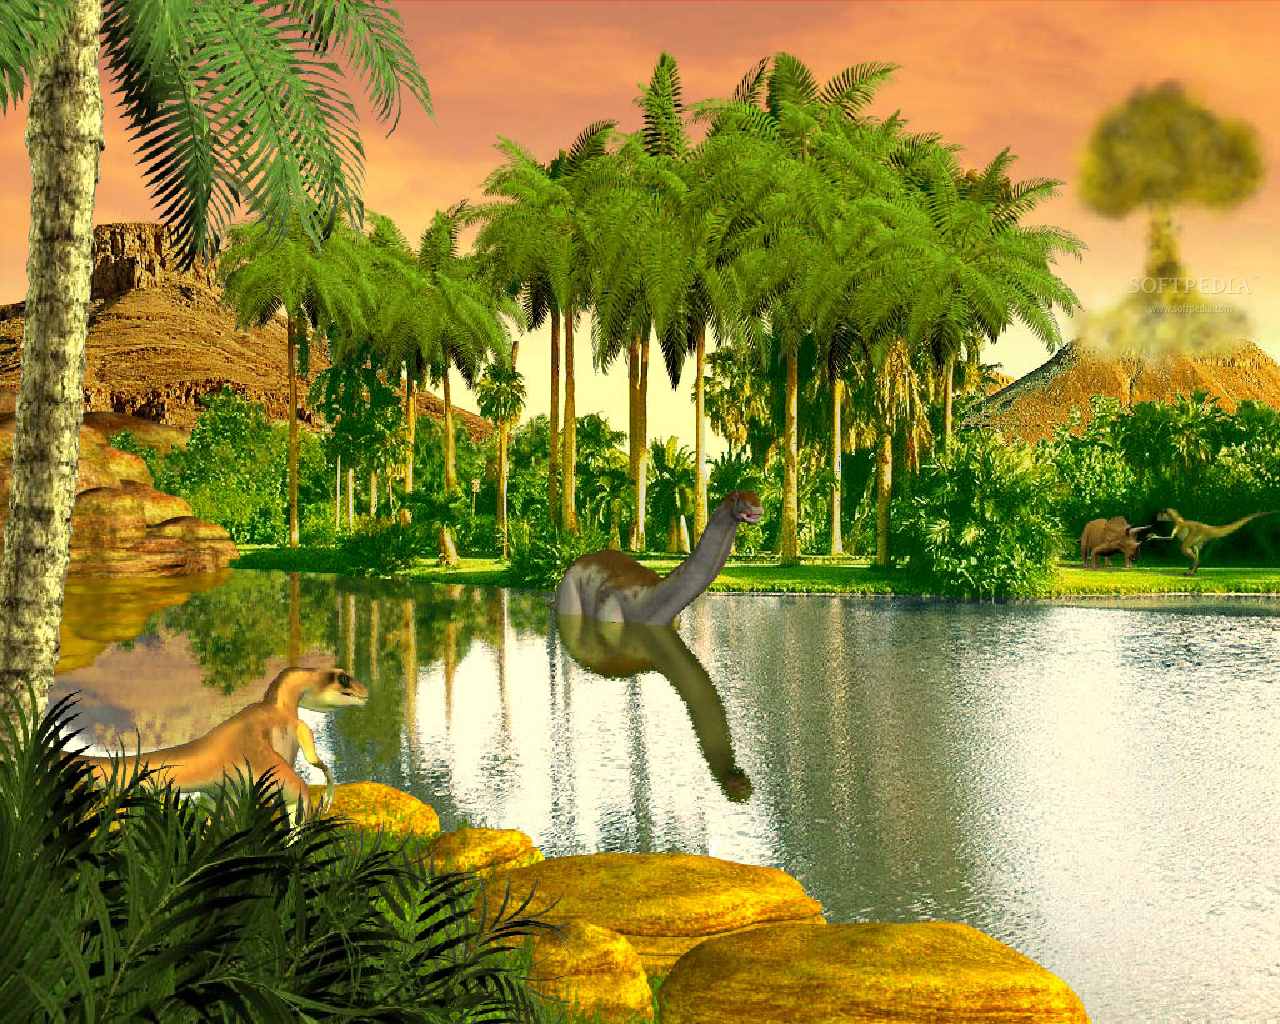 Dinosaur Valley   Animated Wallpaper   This is the image that will be